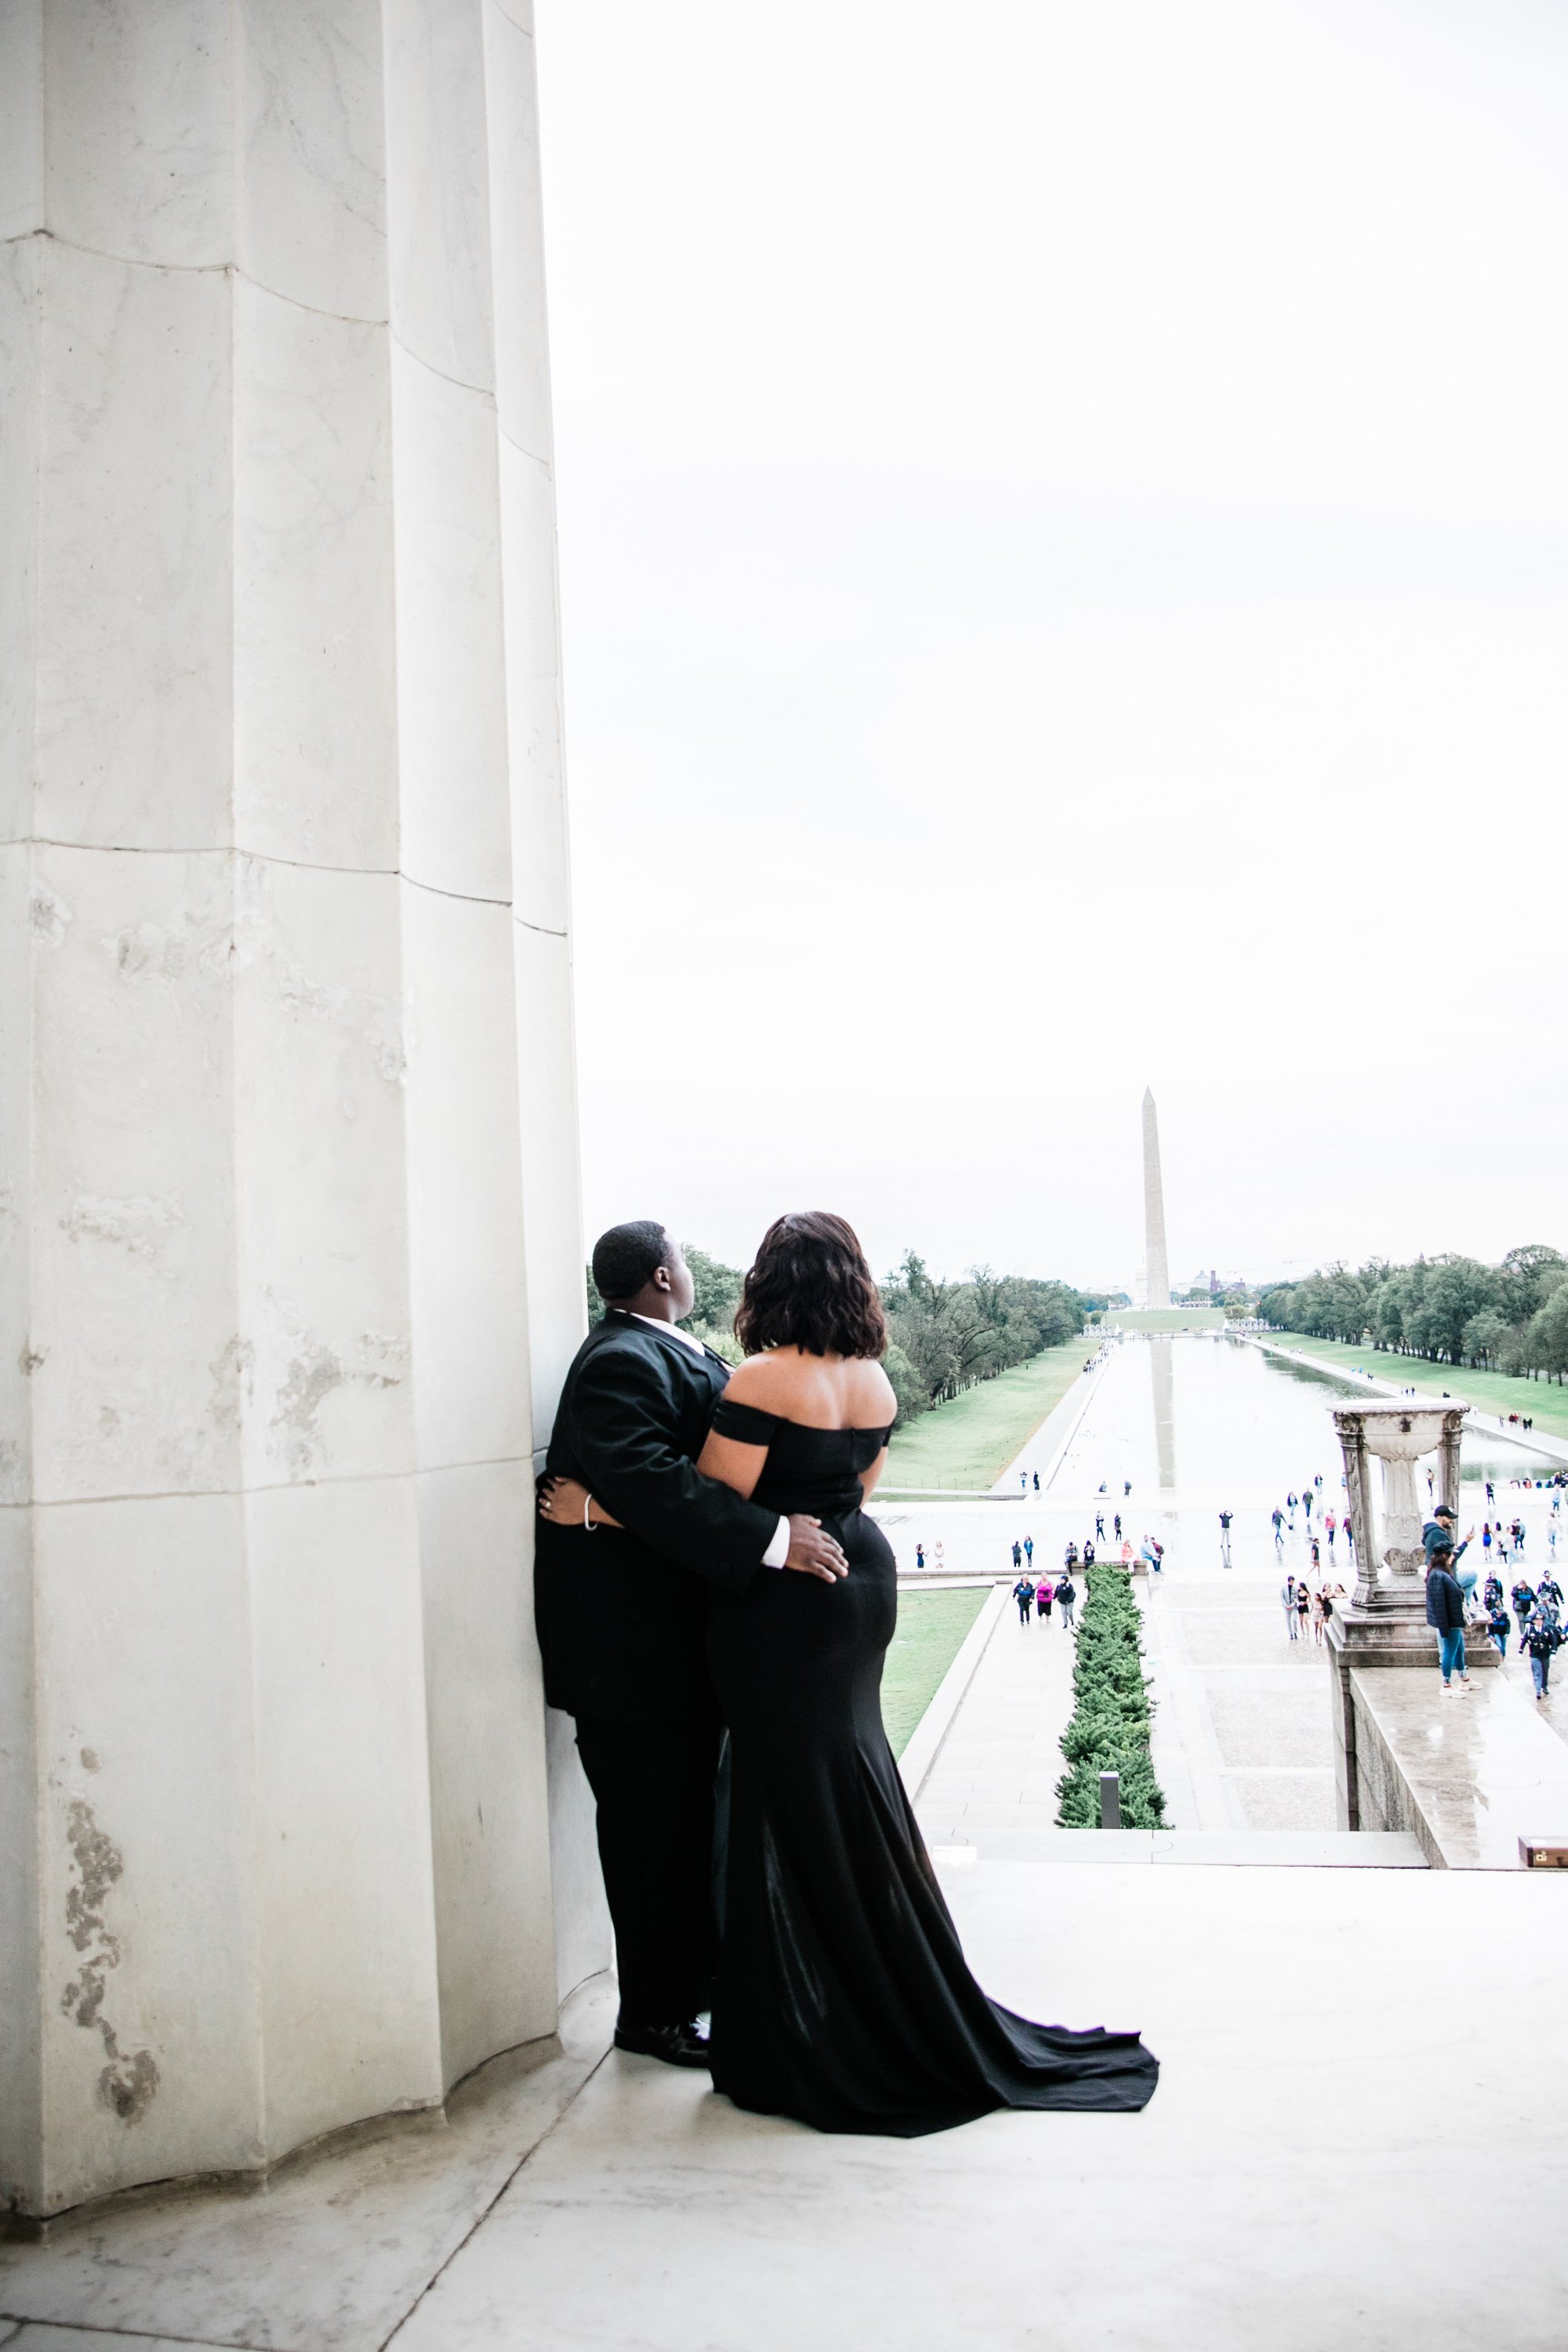 Best Black Wedding Photographers in Washington DC Megapixels Media Photography Engagement Photos at the Lincoln Memorial-28.jpg